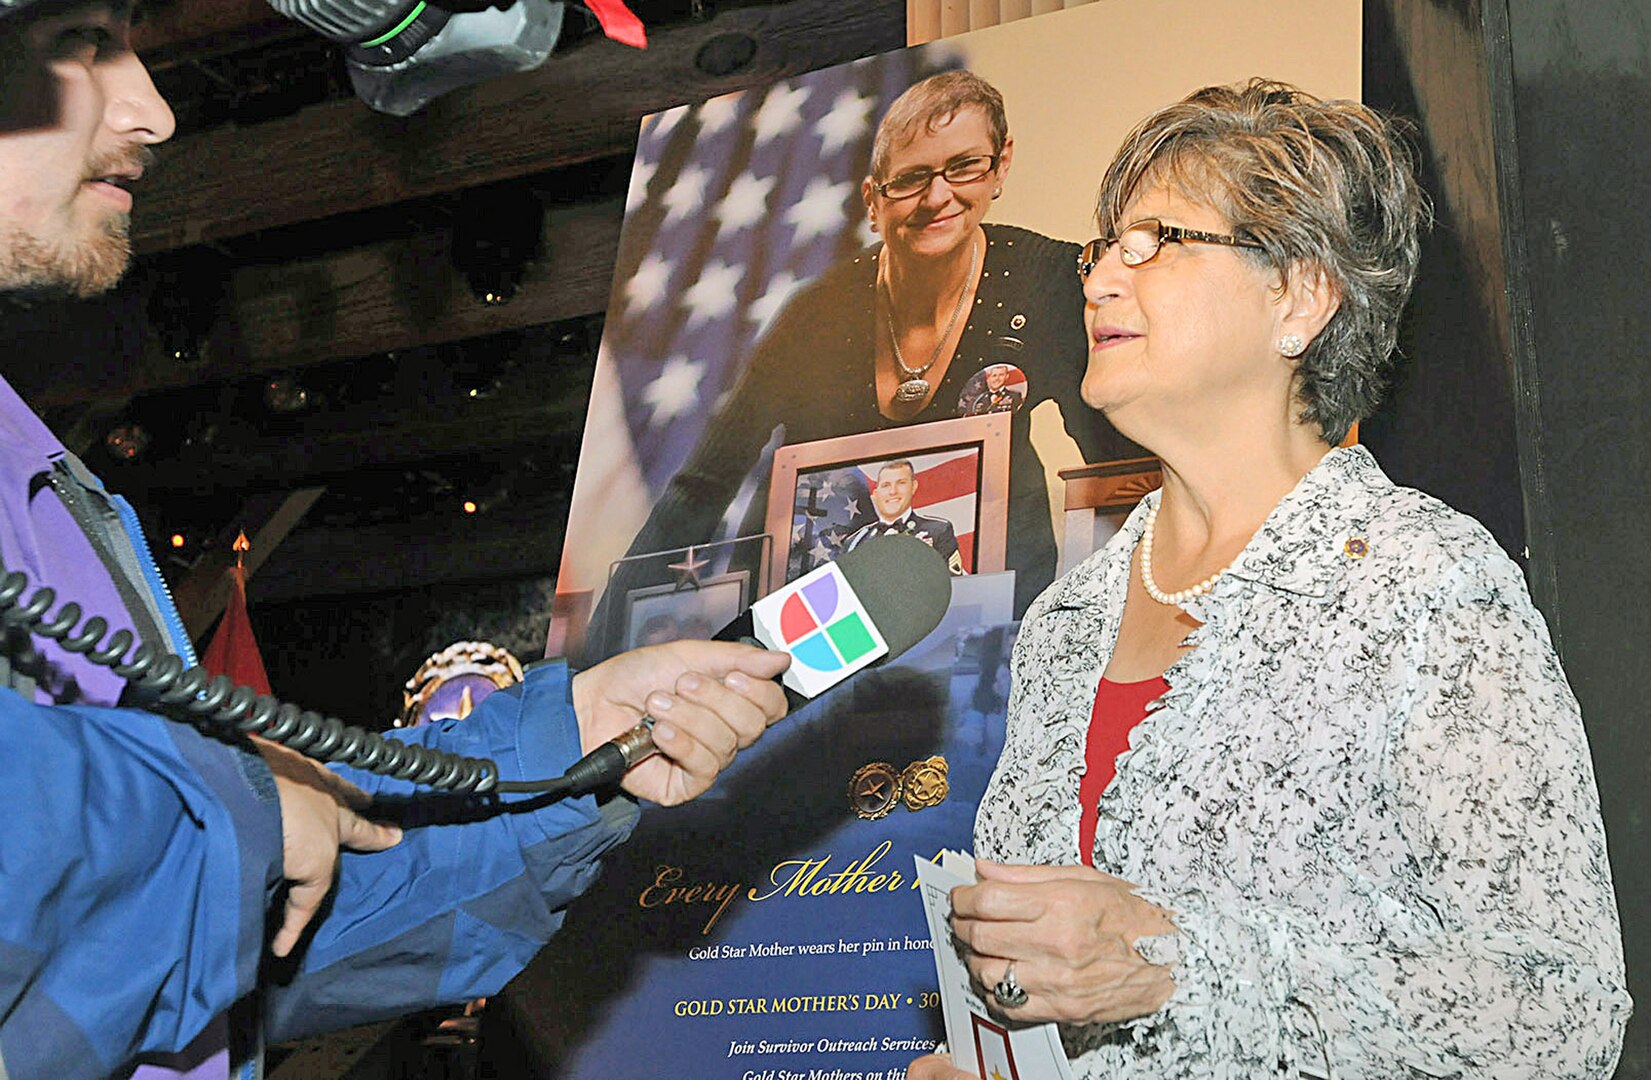 Mary Laureana Aguirre Garza, Gold Star Mother of Army Cpl. Nathaniel Aguirre, shares
her story with a reporter about her son and her ordeal following his death in combat in
Oct. 22, 2006. Garza was present for the Survivor Outreach Services ribbon cutting
ceremony Sept. 29 at the Joint Base San Antonio-Fort Sam Houston Theater. (U.S. Army photo by Sgt. 1st Class Christopher DeHart)